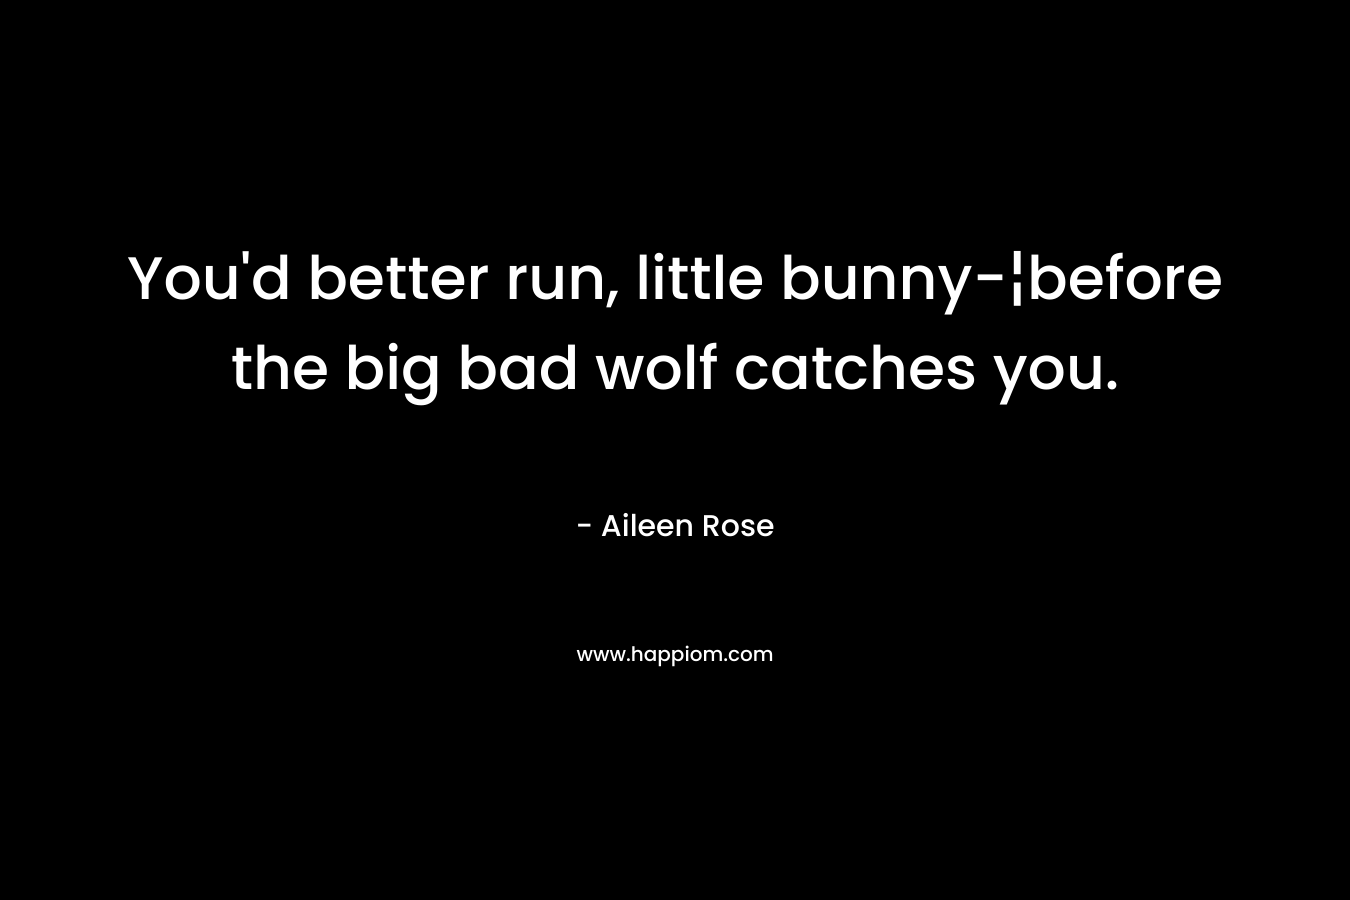 You’d better run, little bunny-¦before the big bad wolf catches you. – Aileen Rose